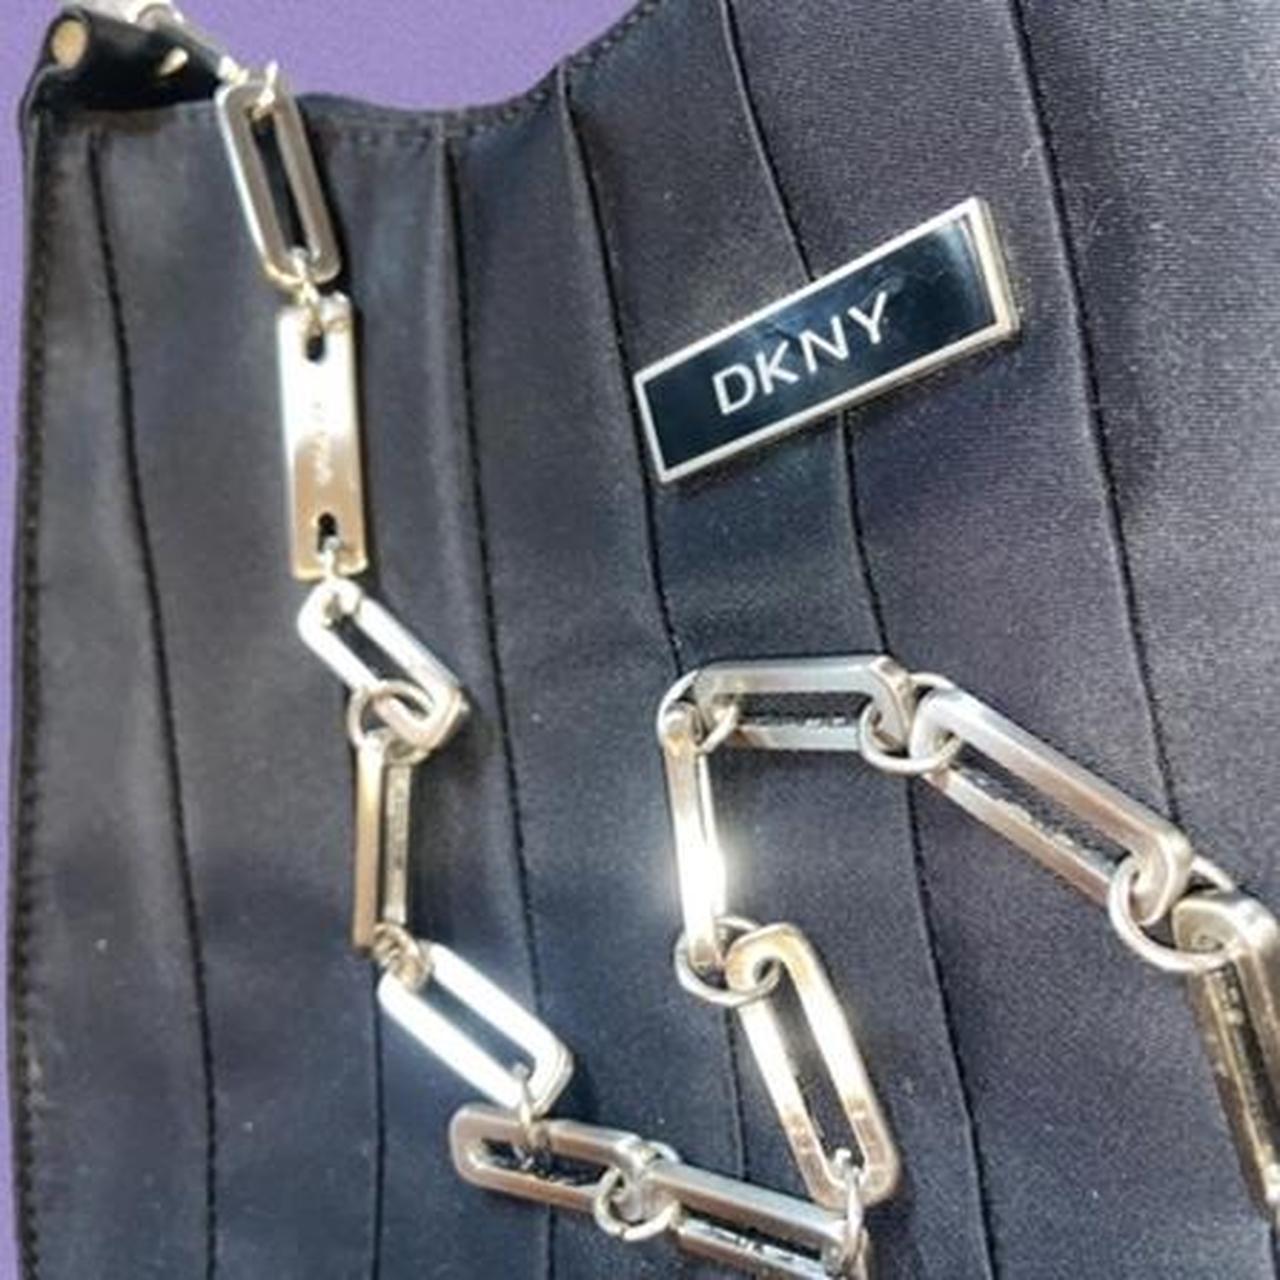 Product Image 2 - Black DKNY
-
This bag is one